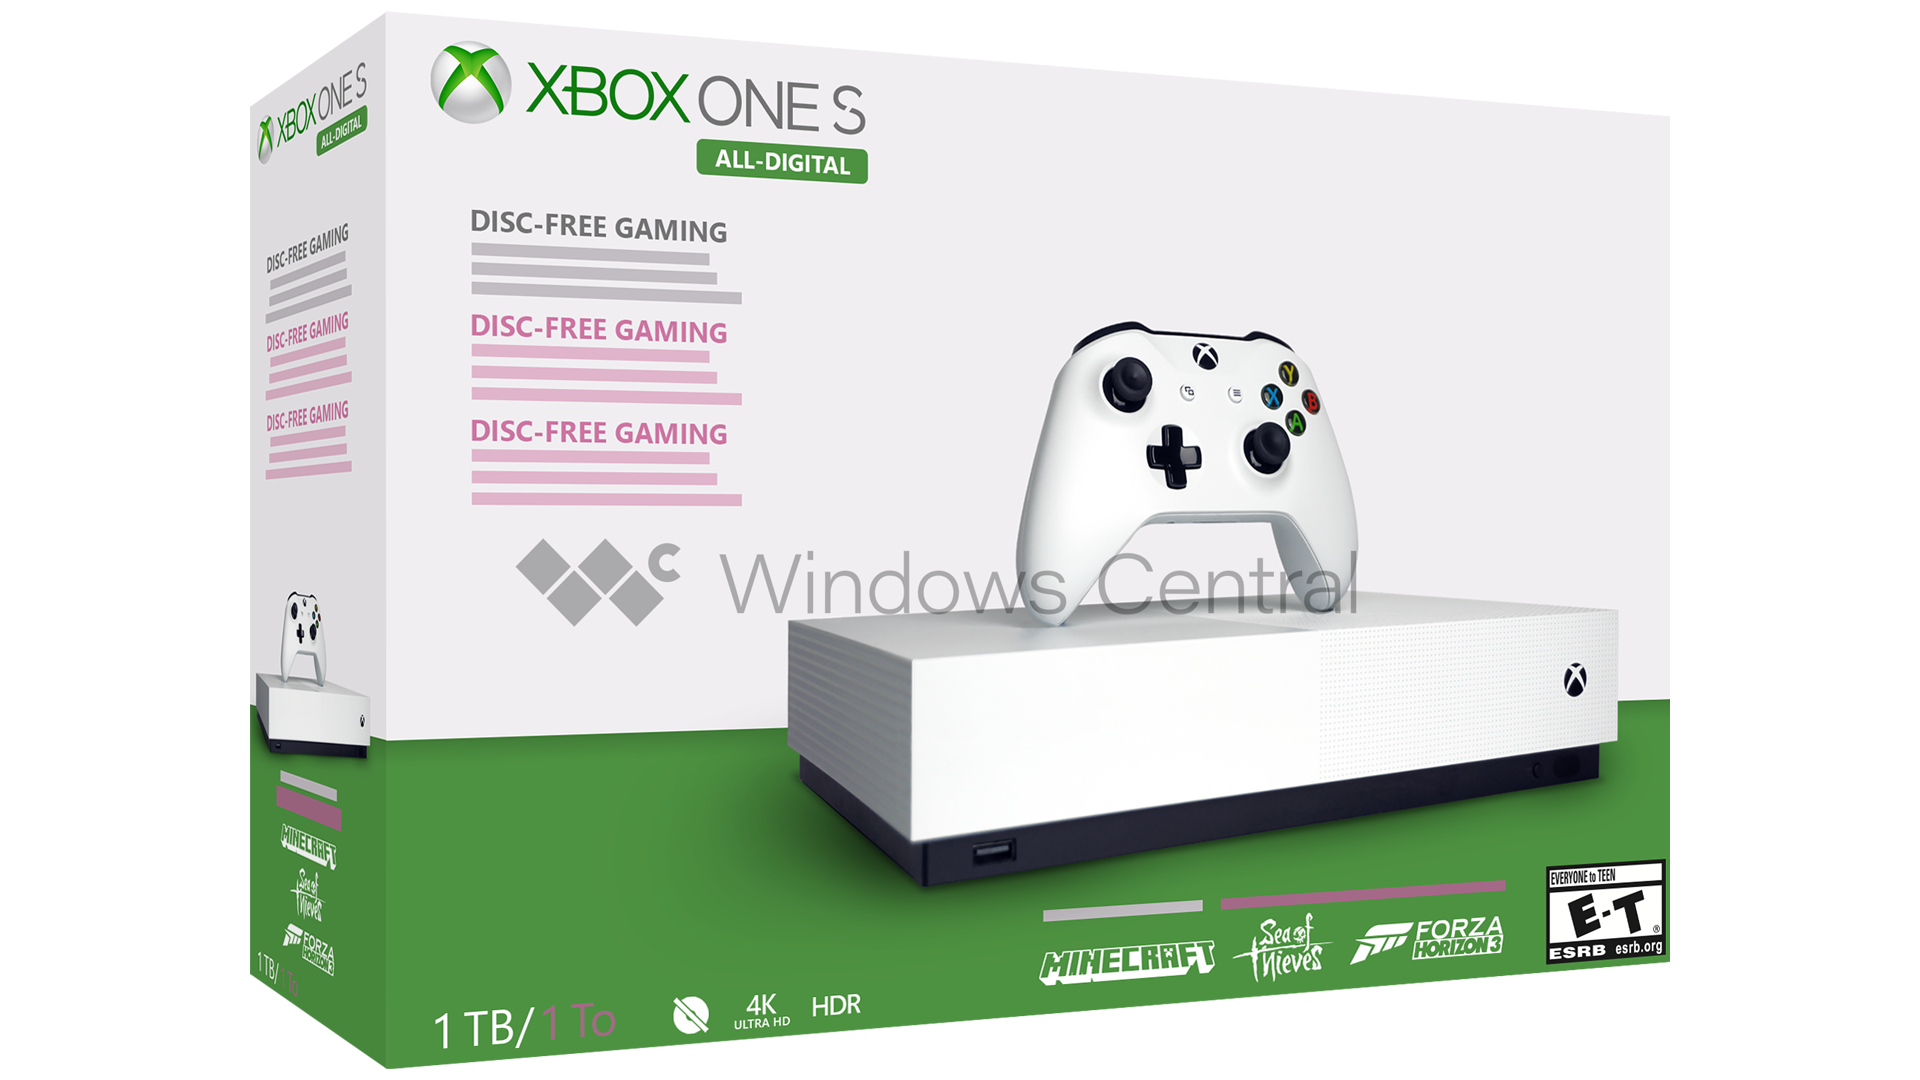 xbox-one-s-all-digital-pack-mock-2.png?itok=UPLb2Iln